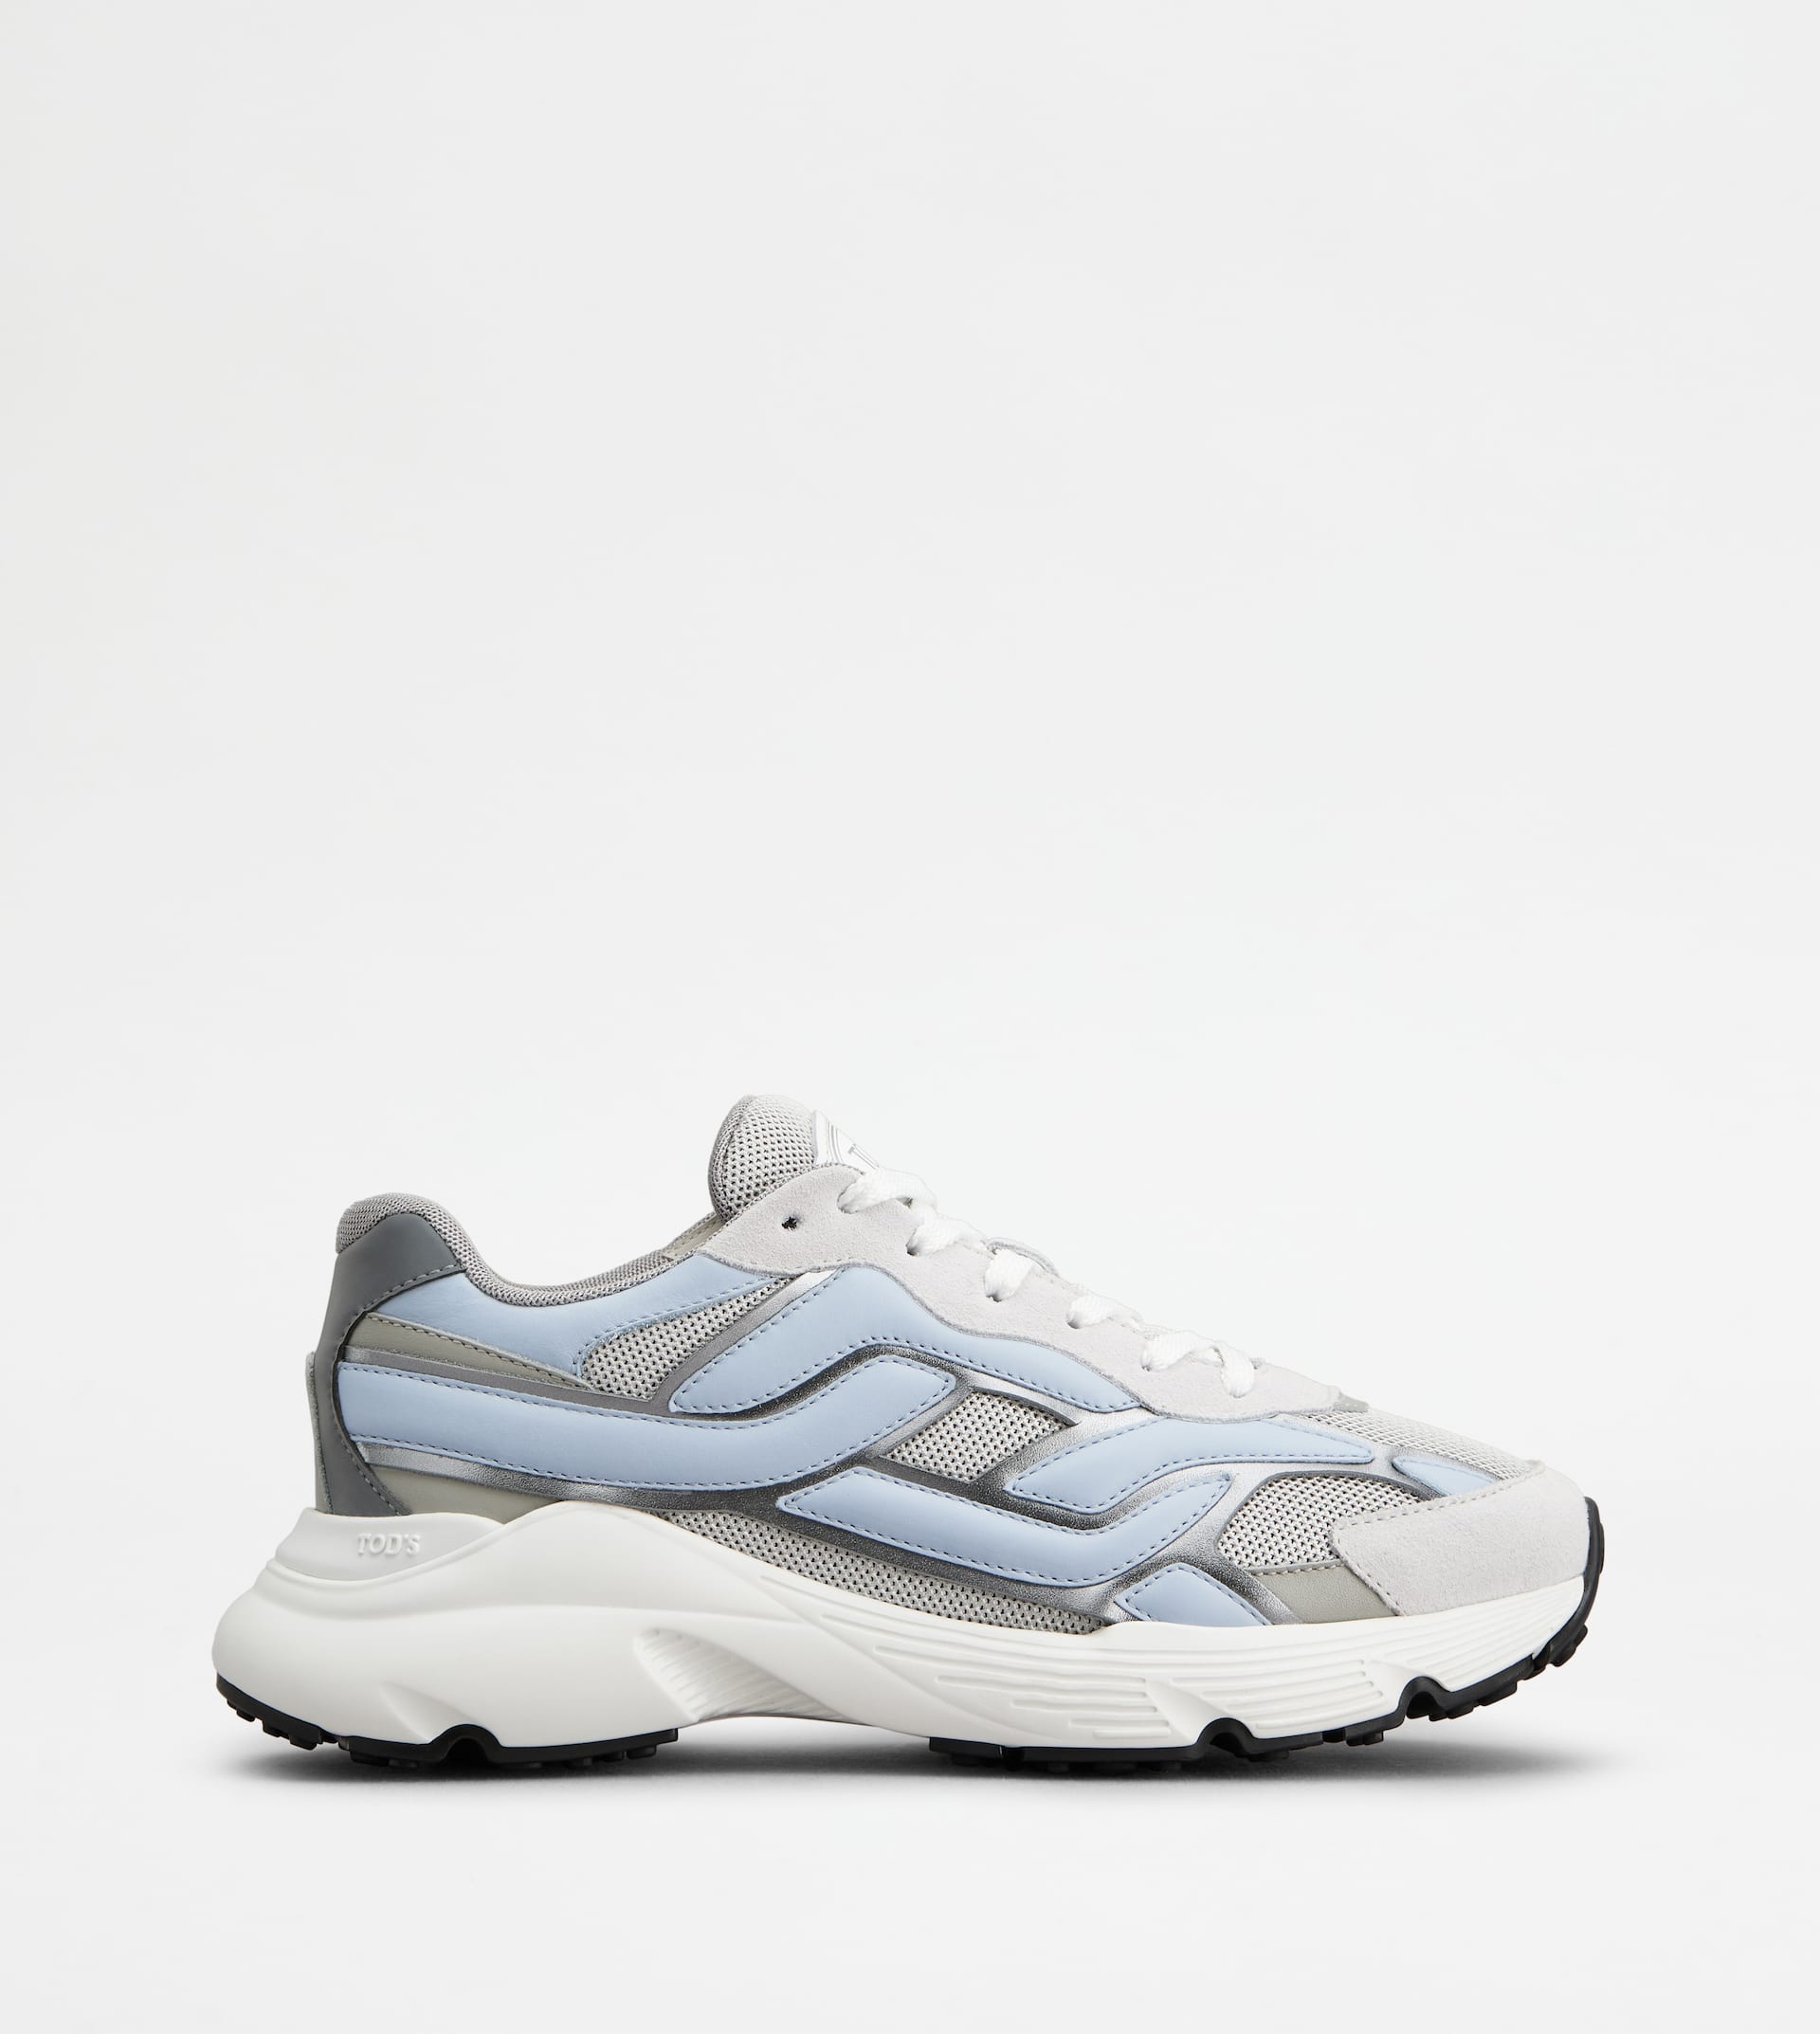 SNEAKERS IN LEATHER AND TECHNICAL FABRIC - SKY BLUE, GREY - 1